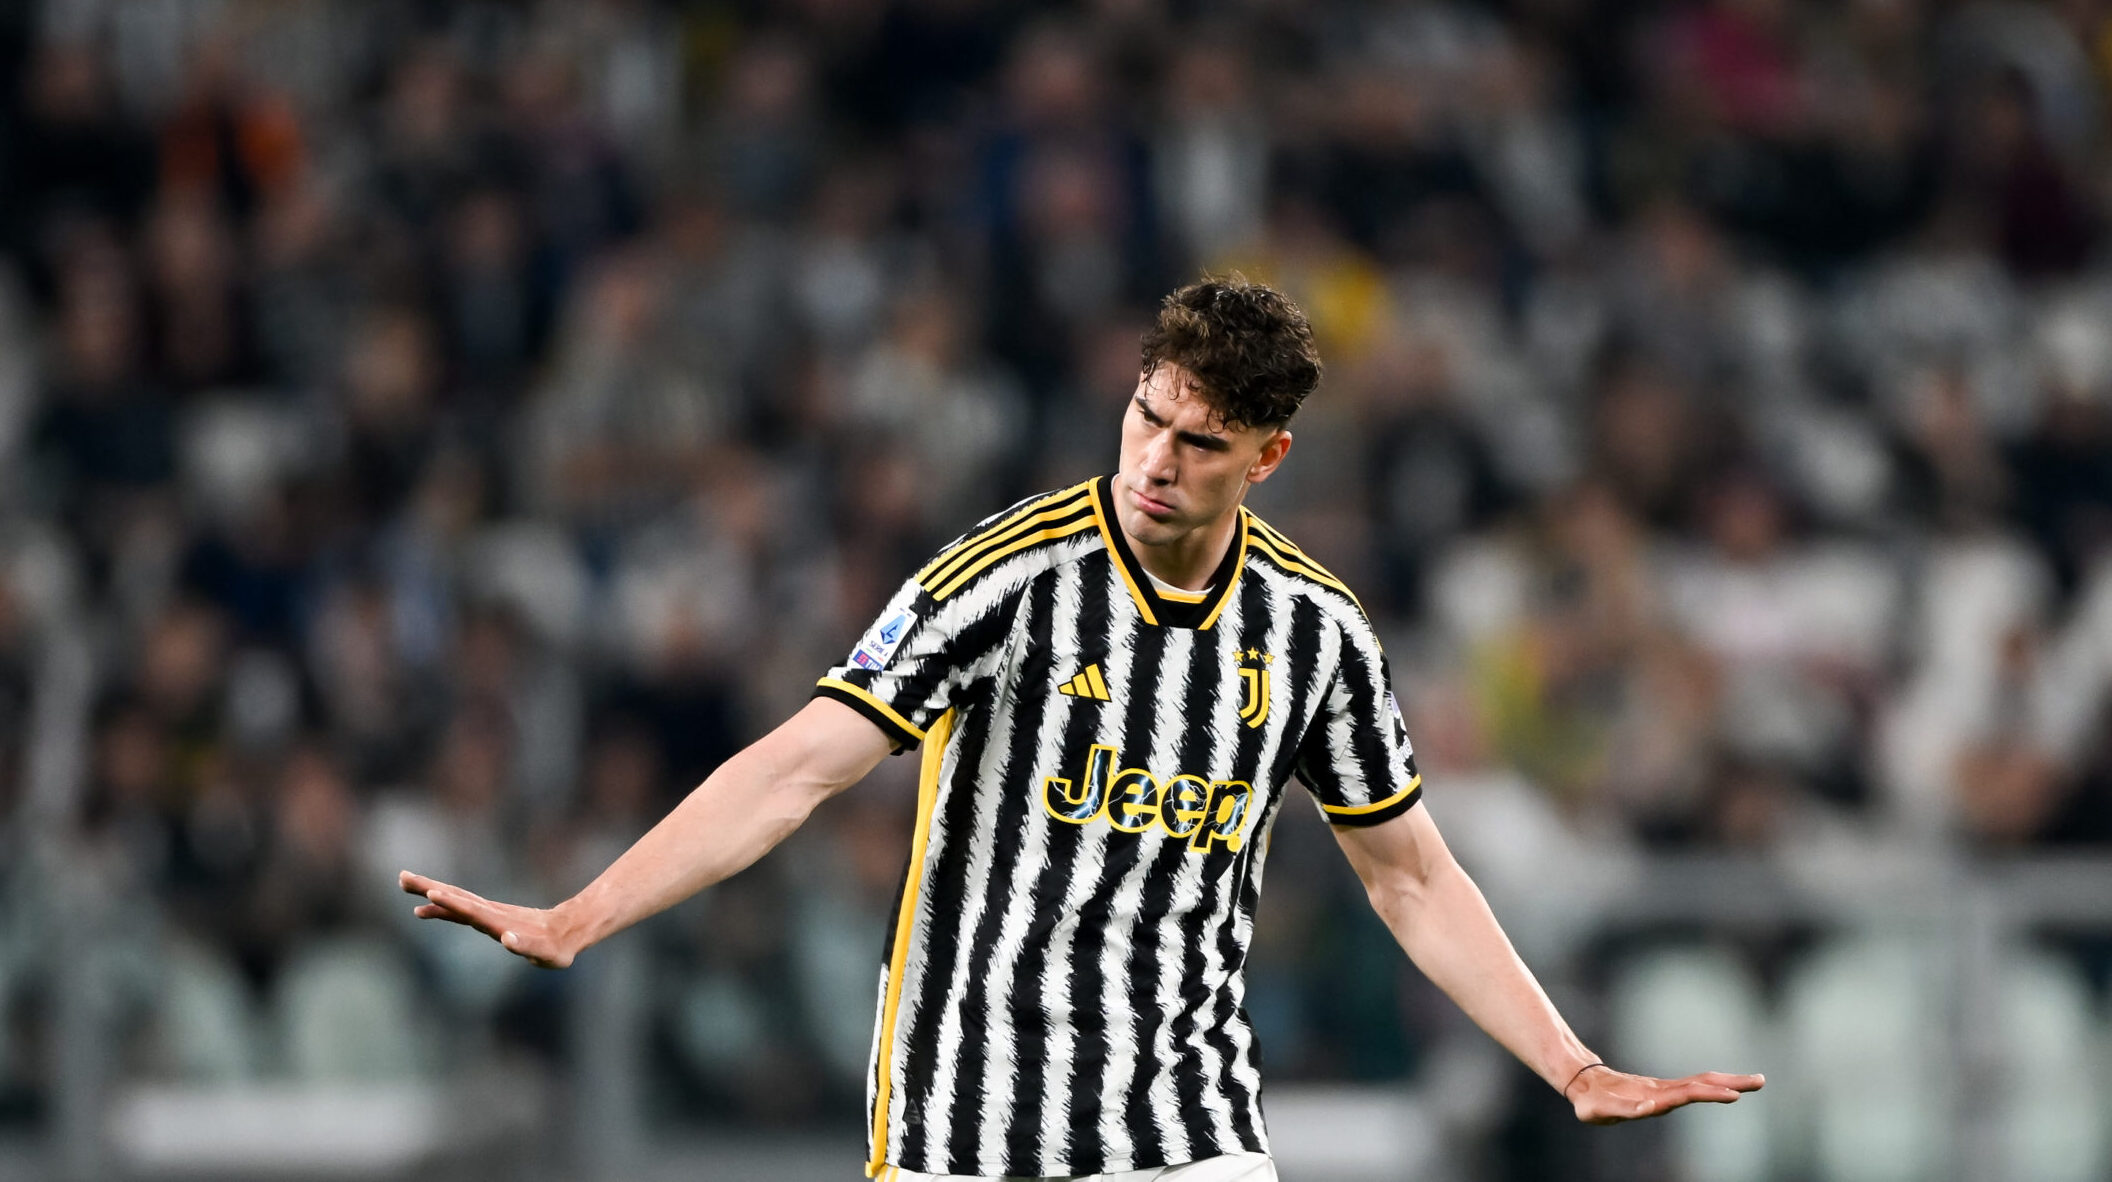 While the future of several Juventus players hangs in the balance, Dusan Vlahovic is one of the few who already knows he will stay put.